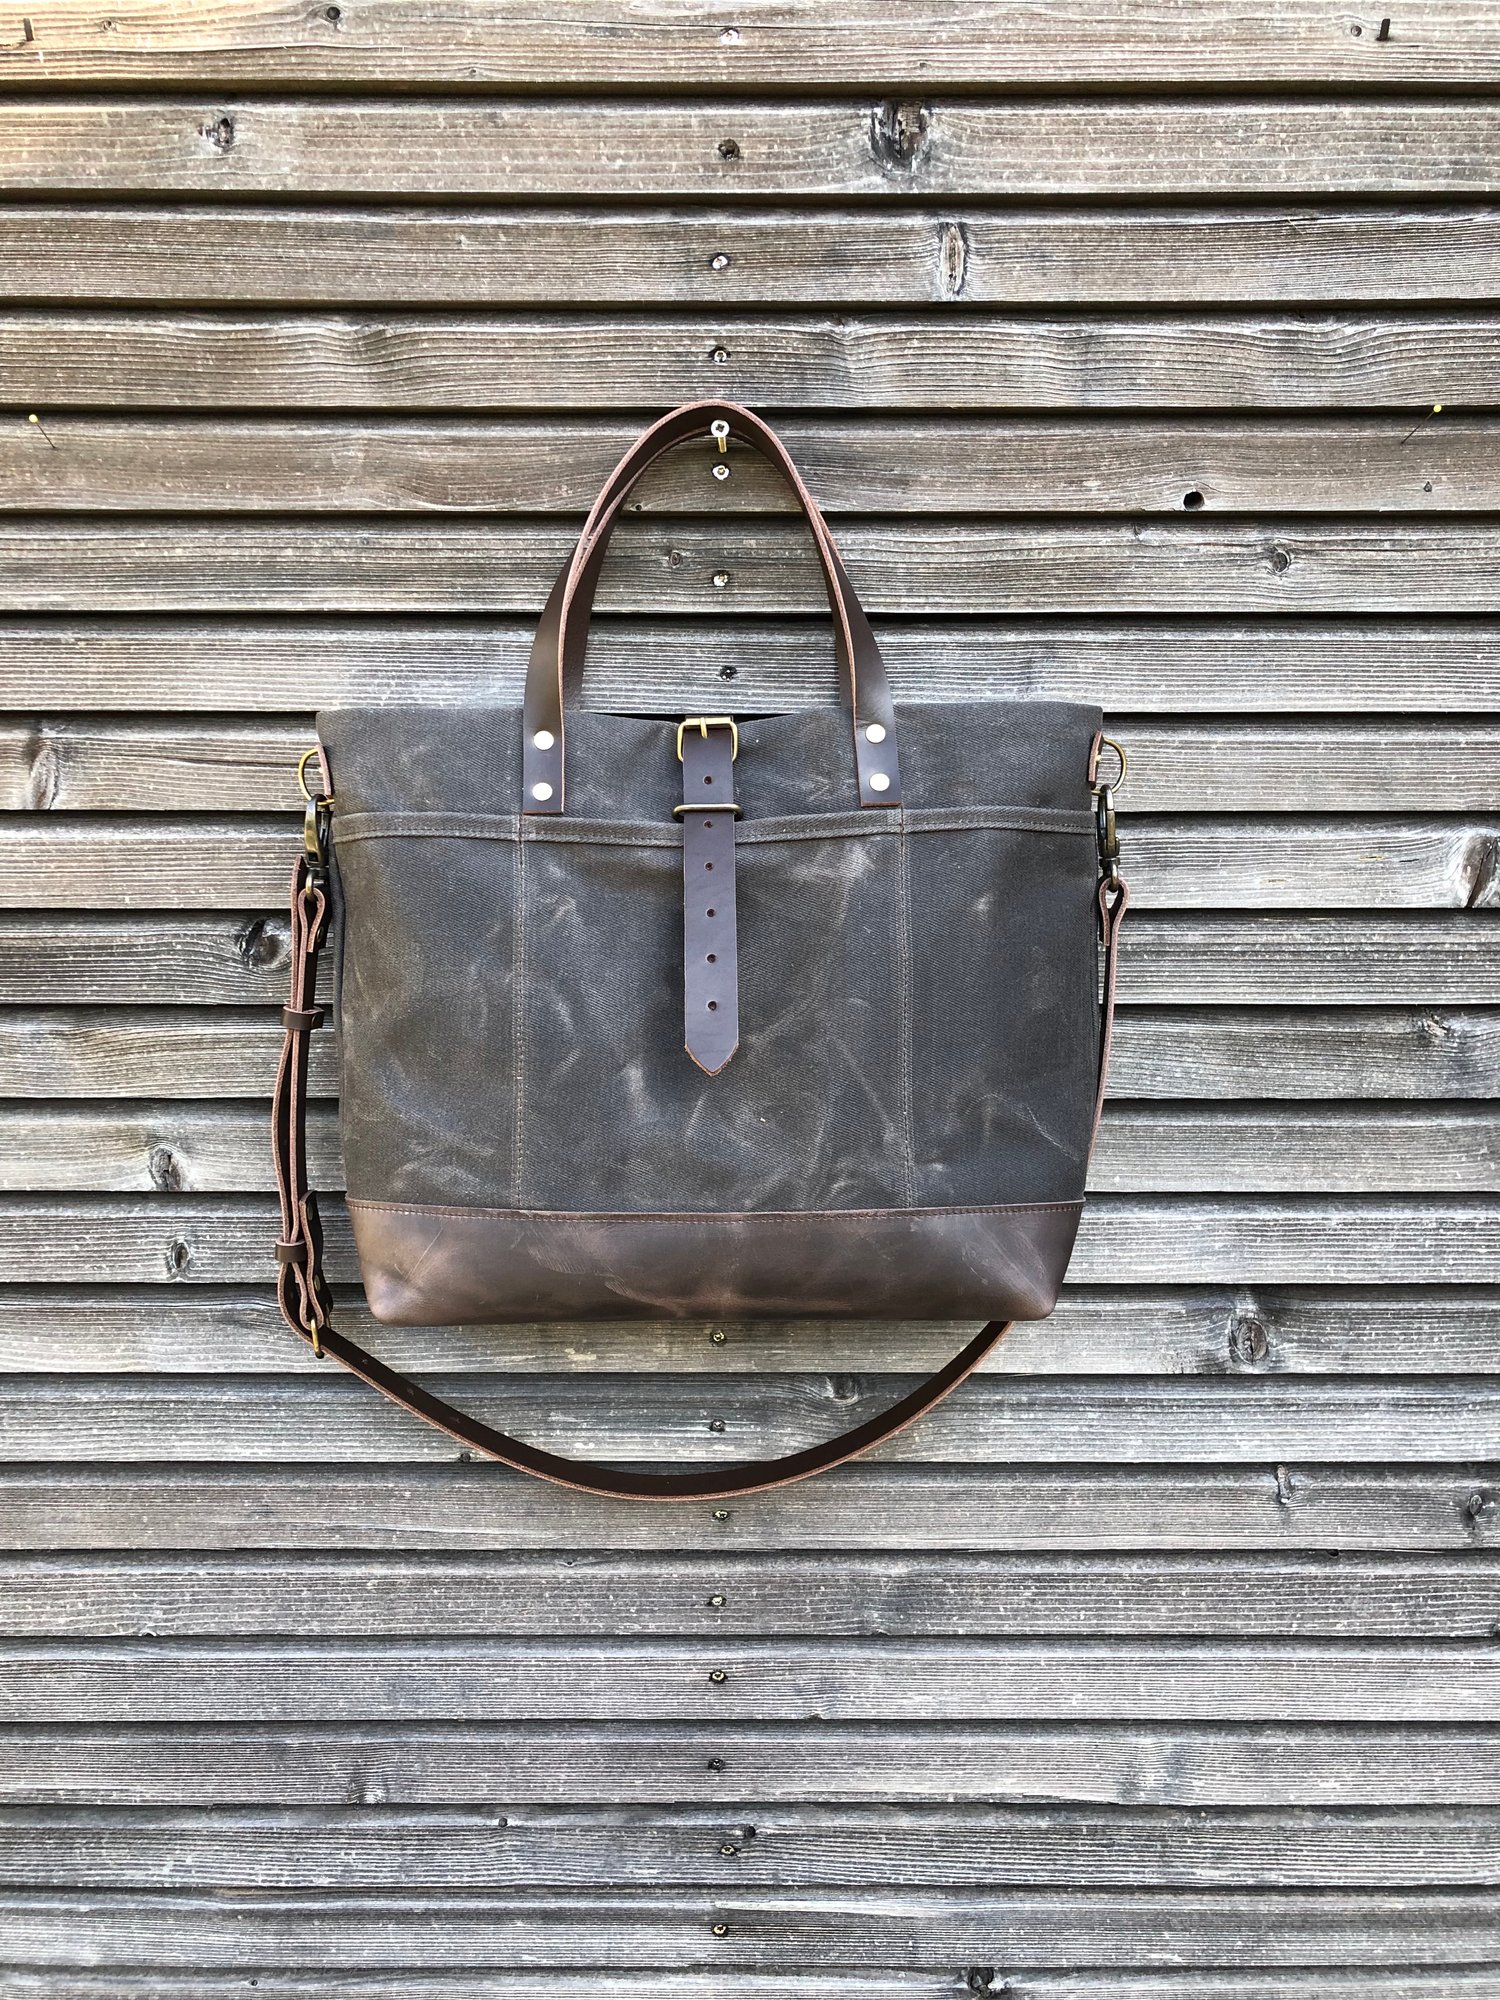 Image of Tote bag in grey brown waxed canvas with leather bottom and cross body strap